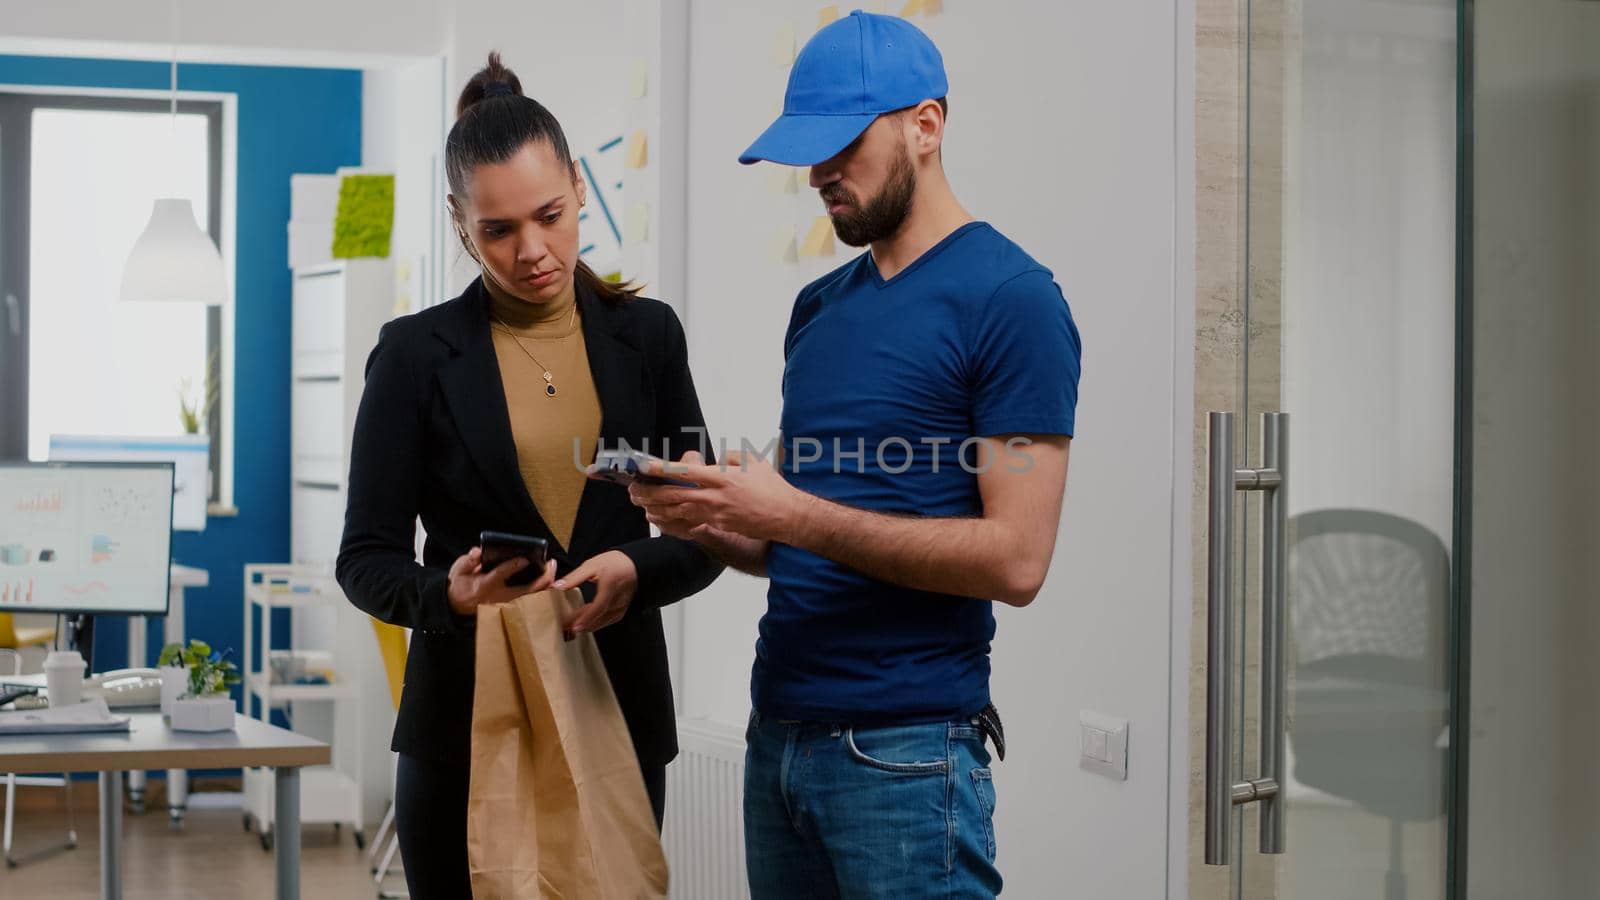 Delivery man bringing takeaway food meal order to businesswoman in startup company office during takeout lunchtime. Entrepreneur receiving lunch paying with smartphone using POS contactless service